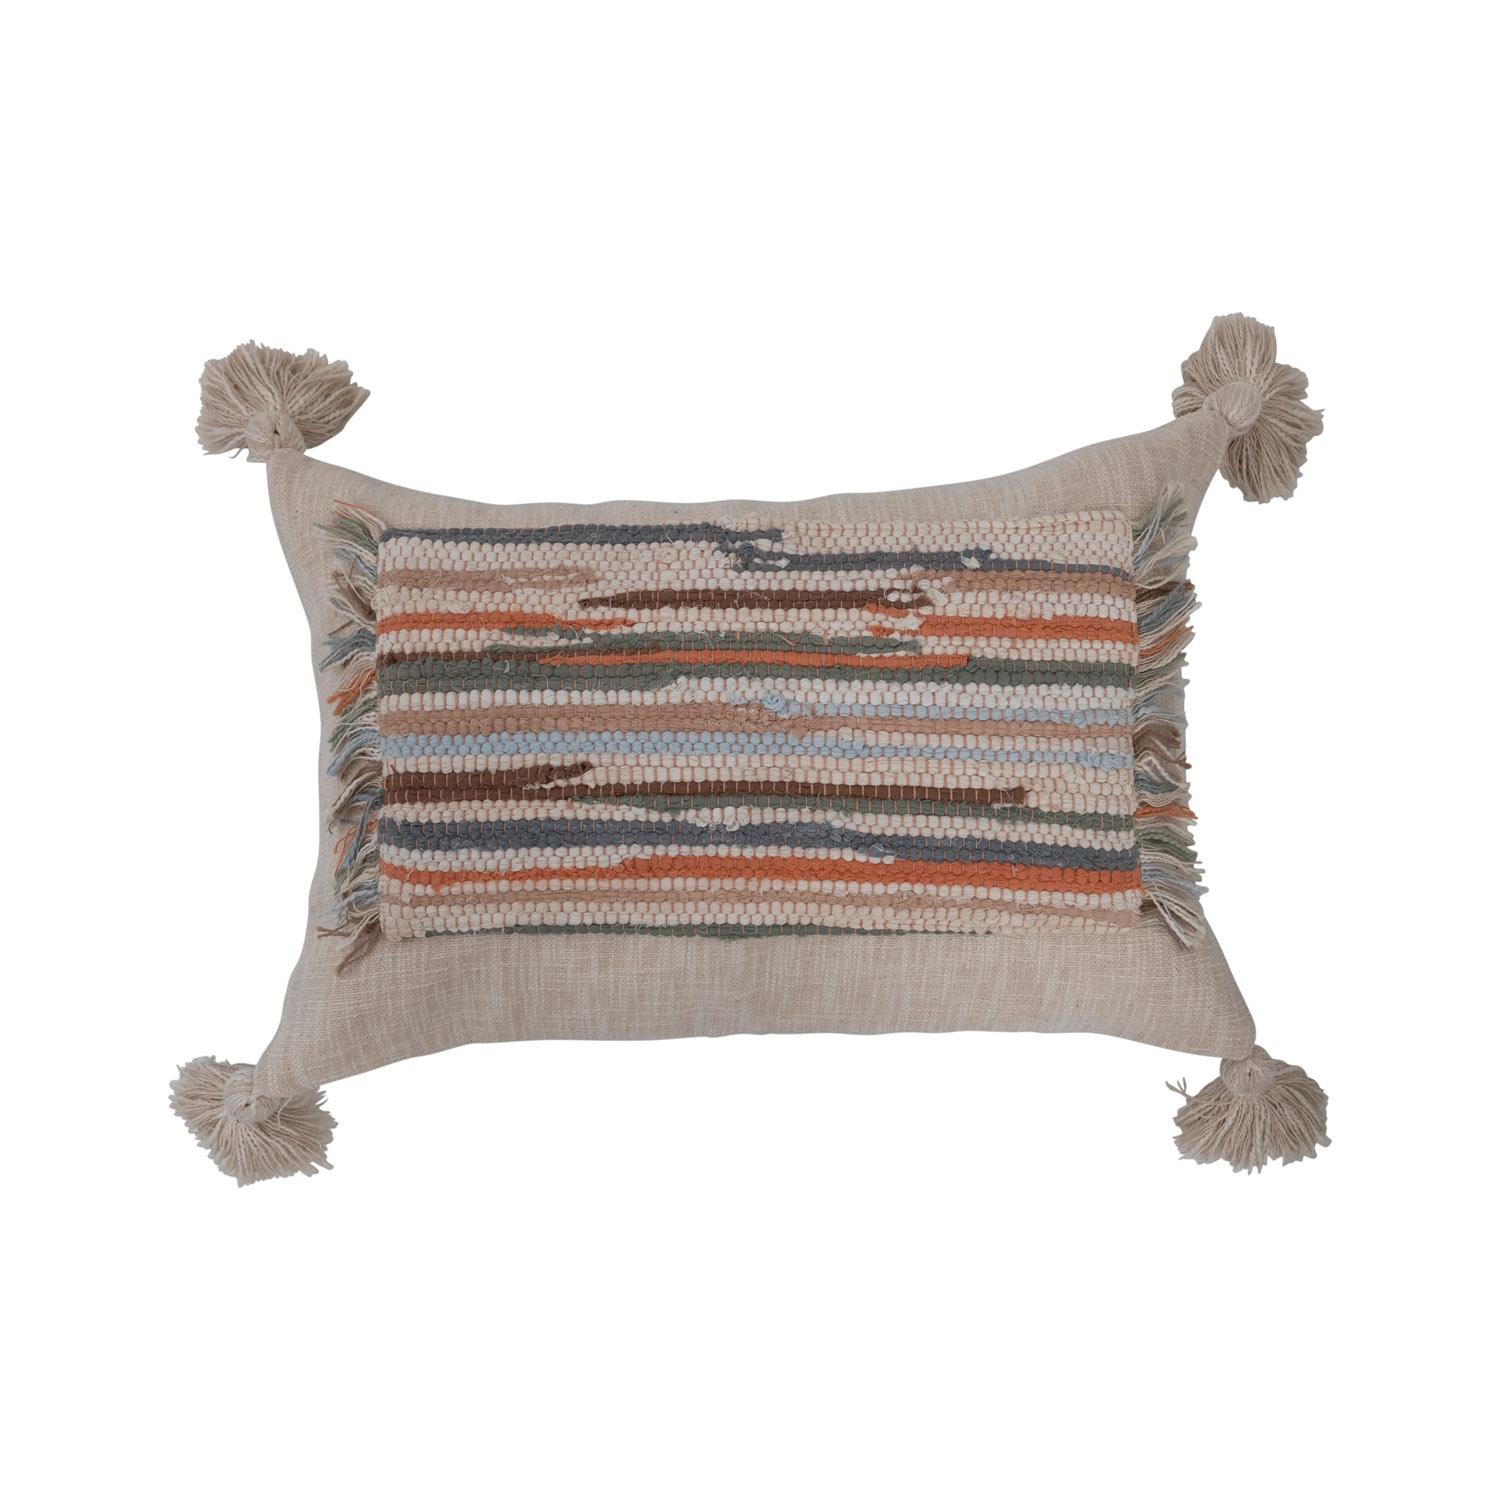 Woven Cotton Slub Lumbar Pillow with Applique, Fringe and Tassels - Image 0